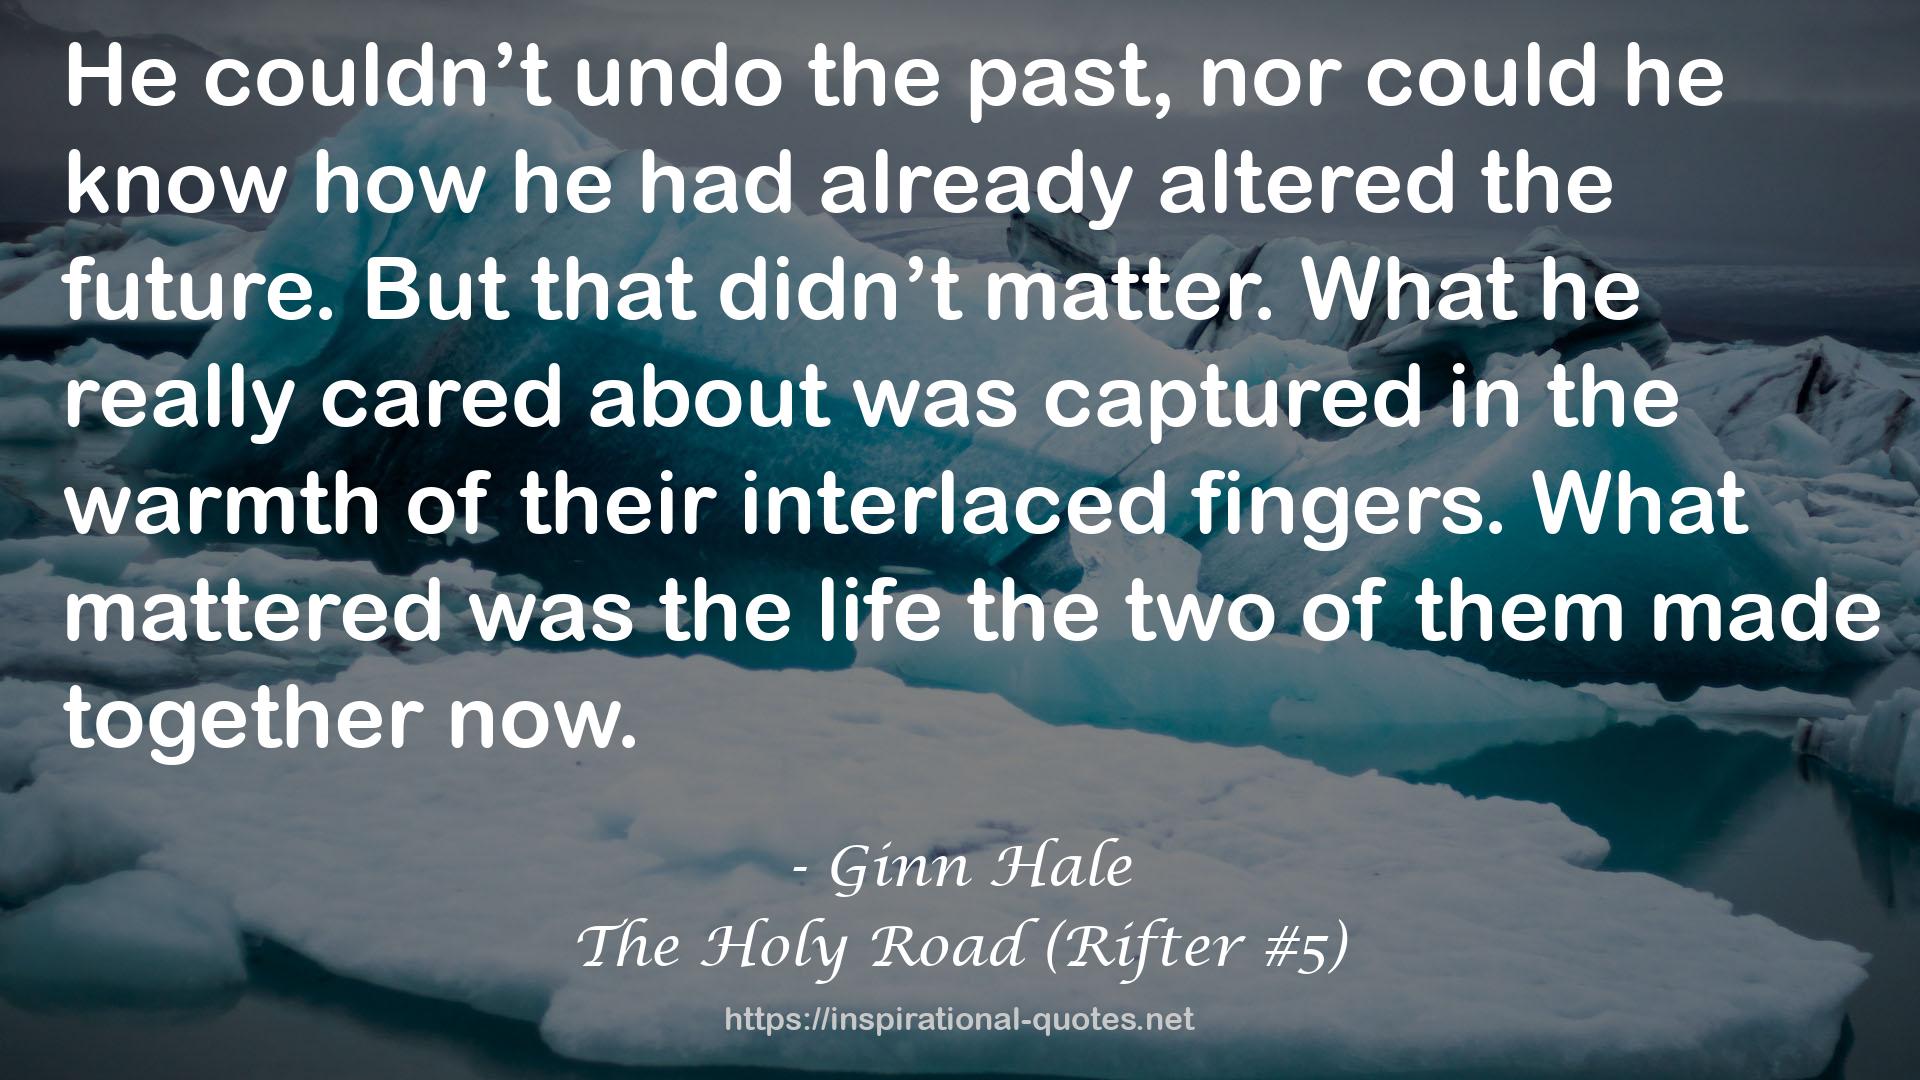 The Holy Road (Rifter #5) QUOTES